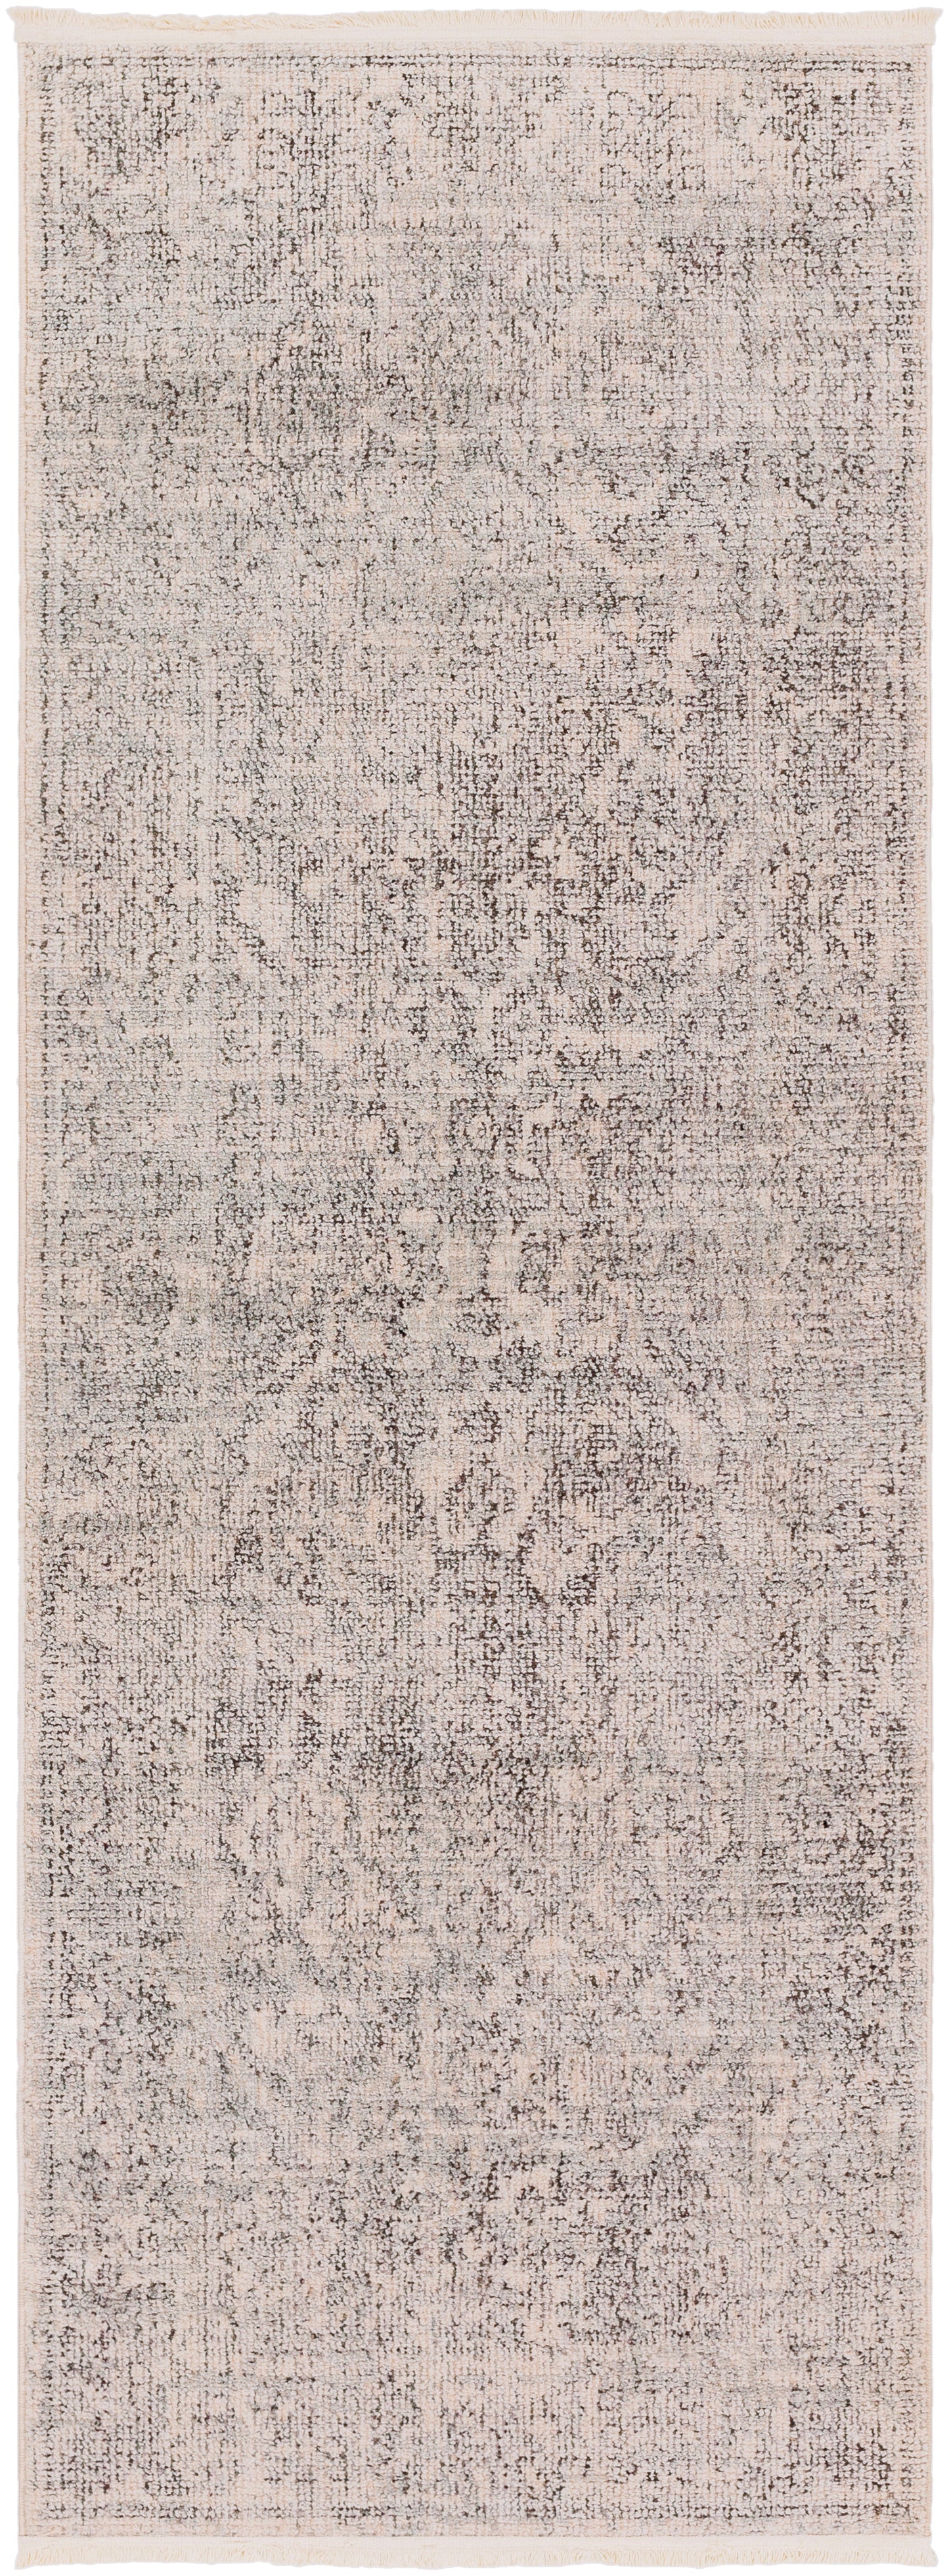 Subtle 30727 Machine Woven Synthetic Blend Indoor Area Rug by Surya Rugs